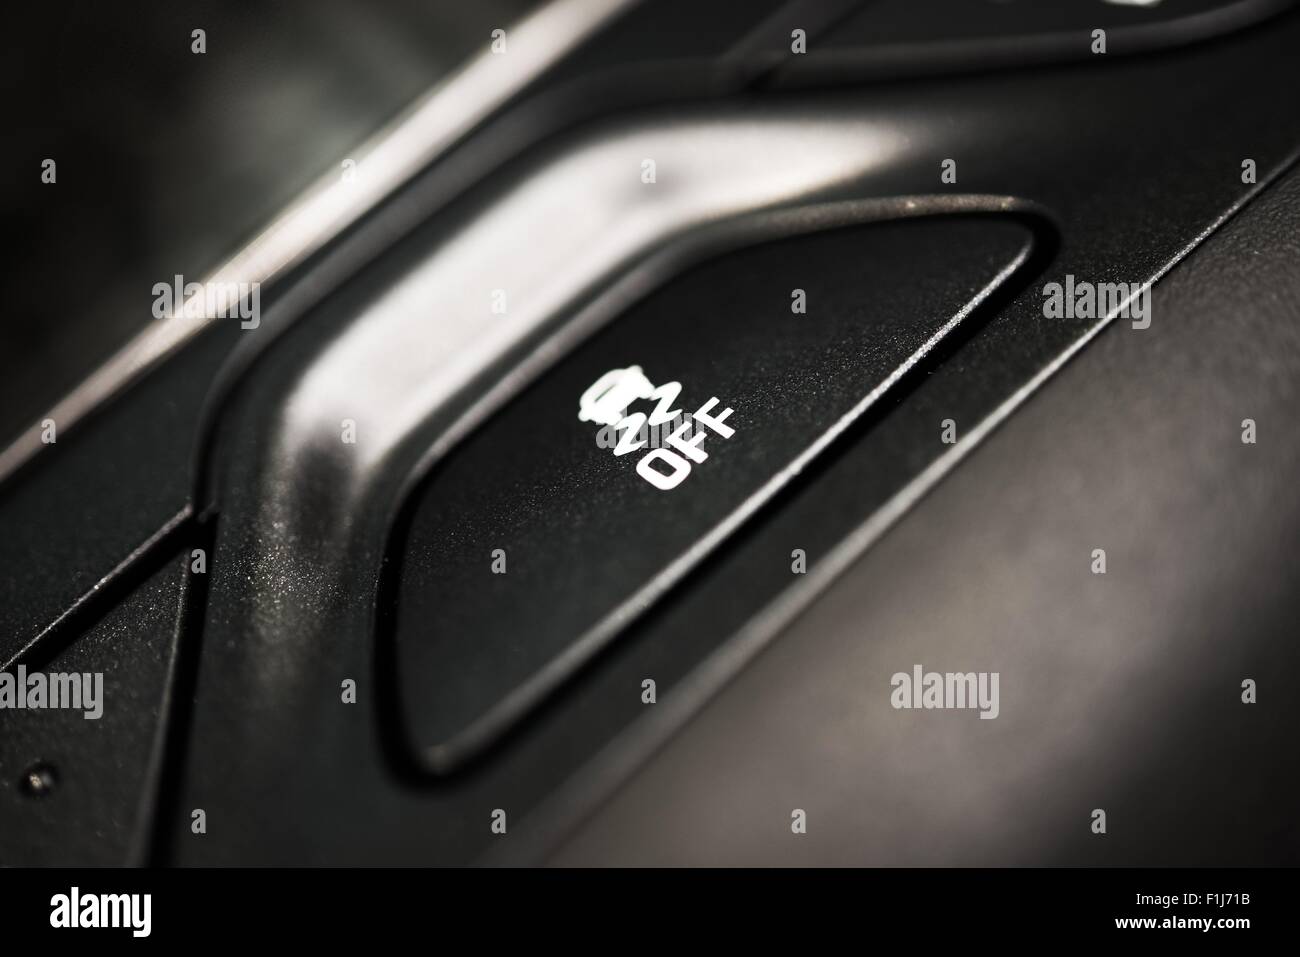 Traction Control Off Button Closeup. Traction Control in Car System. Safety Car Feature. Stock Photo